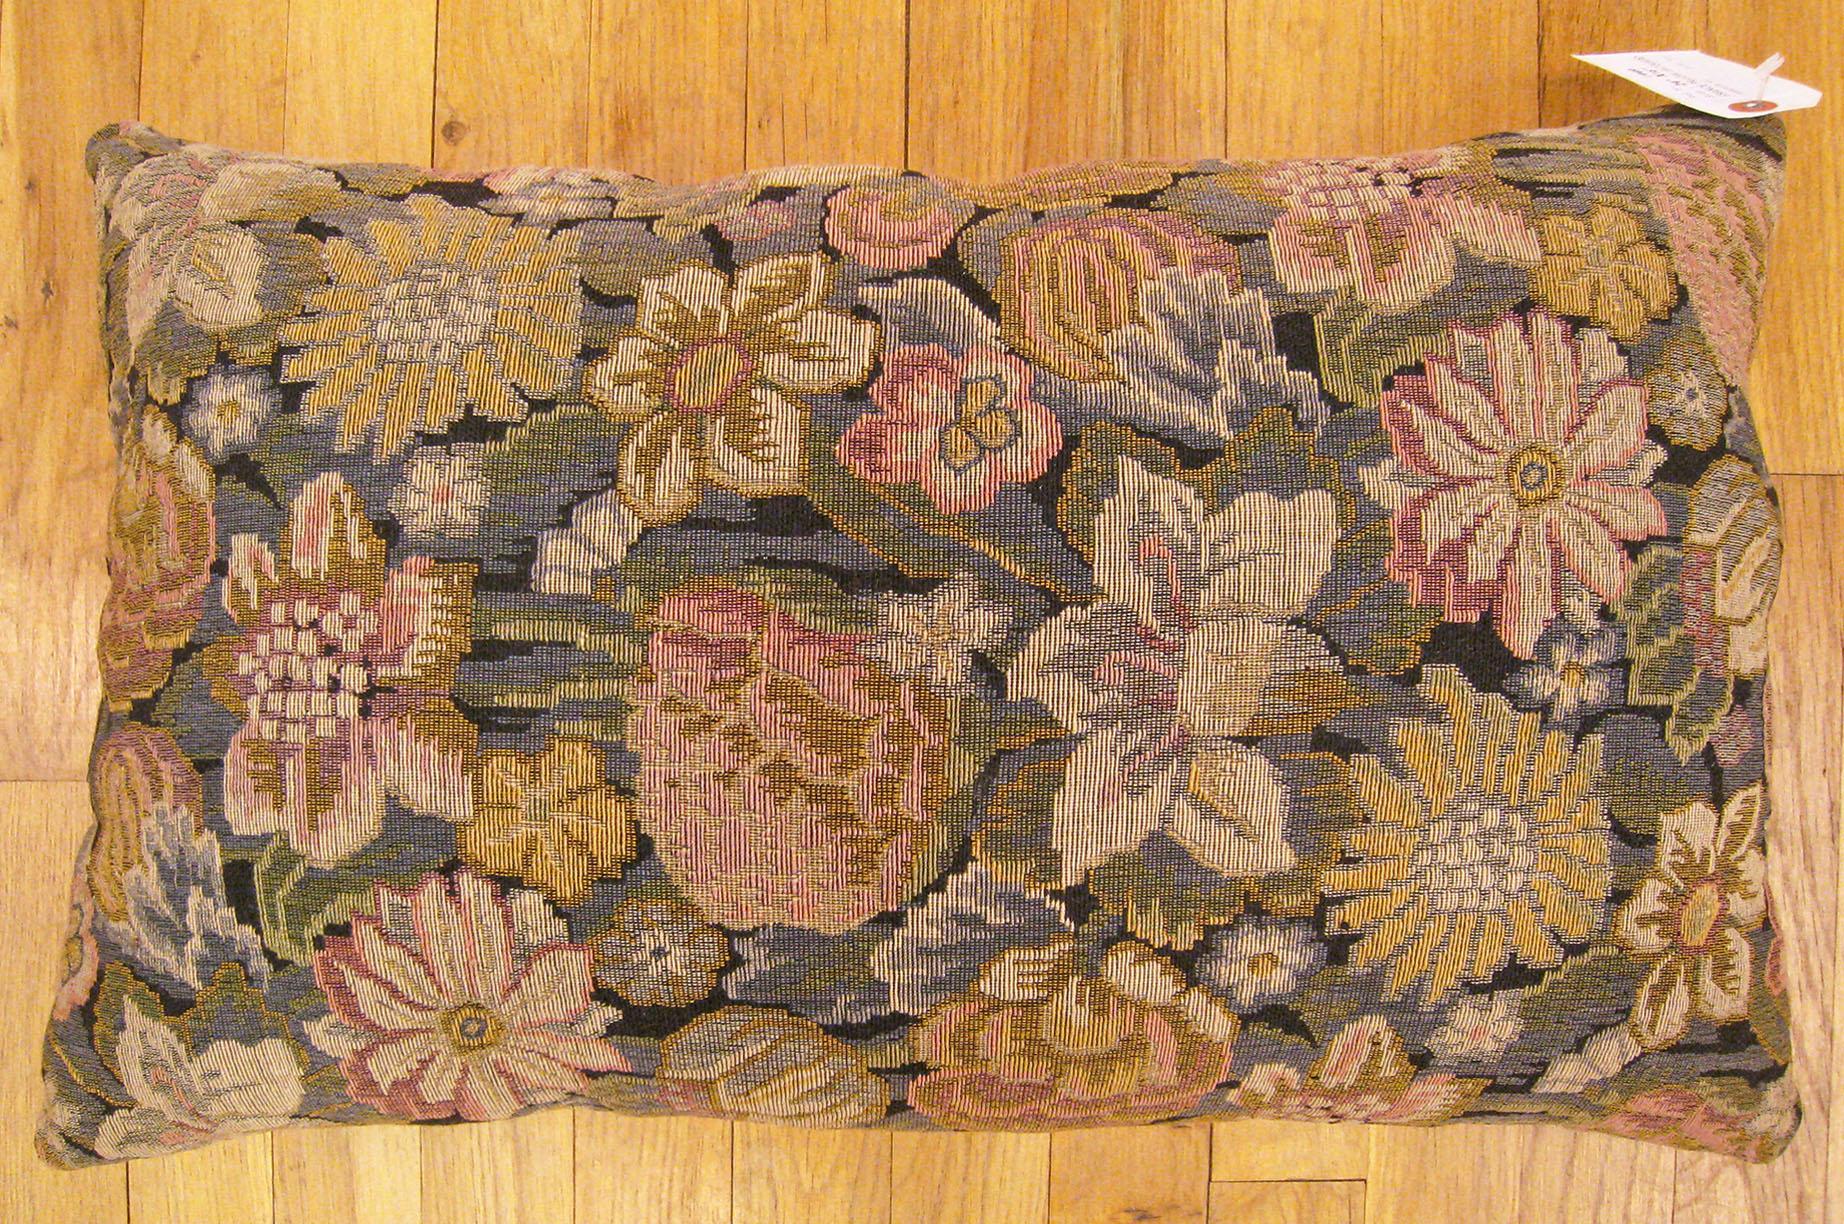 Antique Jacquard Tapestry Pillow; size 24” x 16” (2’ 0” x 1’ 4”)

An antique decorative pillow with floral elments allover a green central field, size 24” x 16” (2’ 0” x 1’ 4”). This lovely decorative pillow features an antique fabric on front which